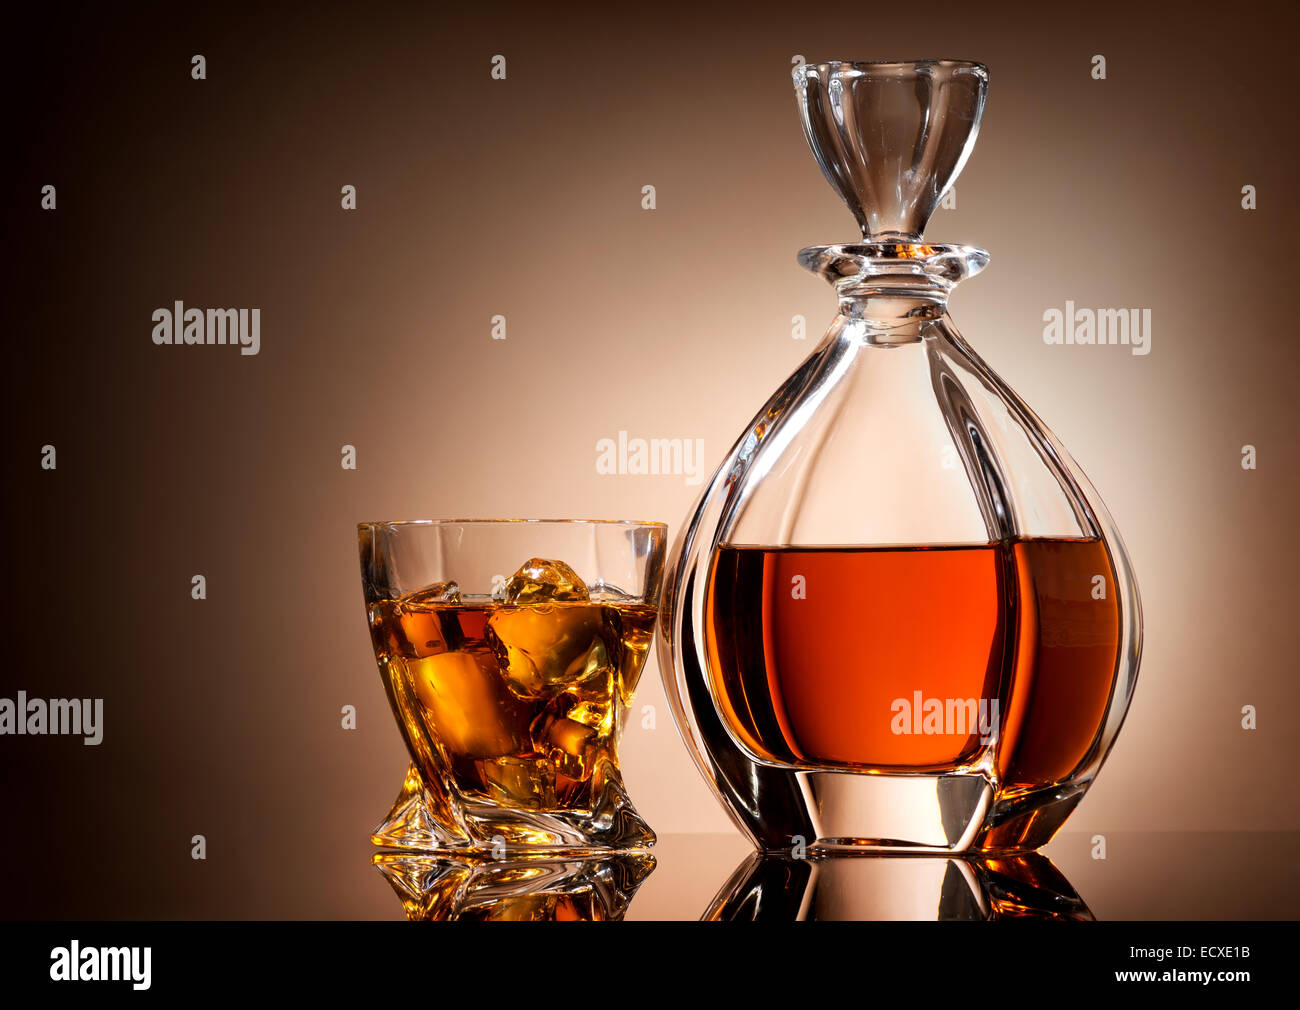 Decanter and glass of golden whiskey on brown background Stock Photo